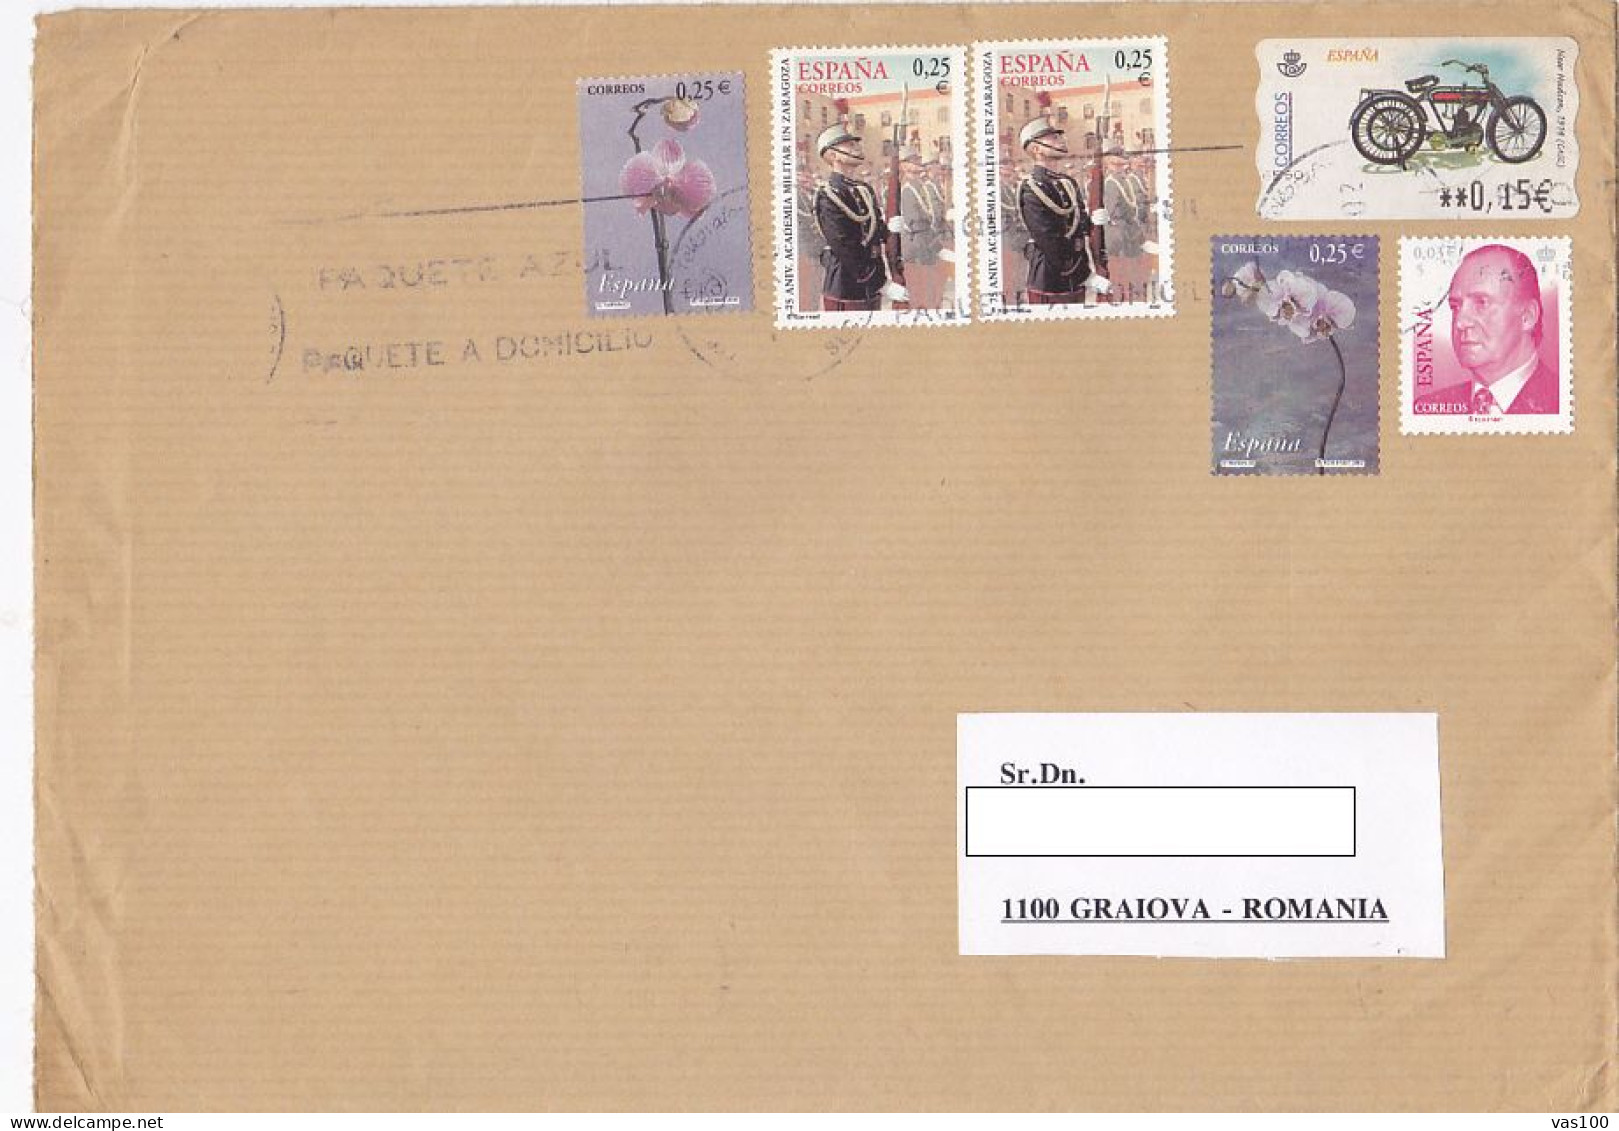 ORCHIDS, ZARAGOZA MILITARY ACADEMY, KING JUAN CARLOS, MOTORBIKE, STAMPS ON COVER, 2002, SPAIN - Lettres & Documents